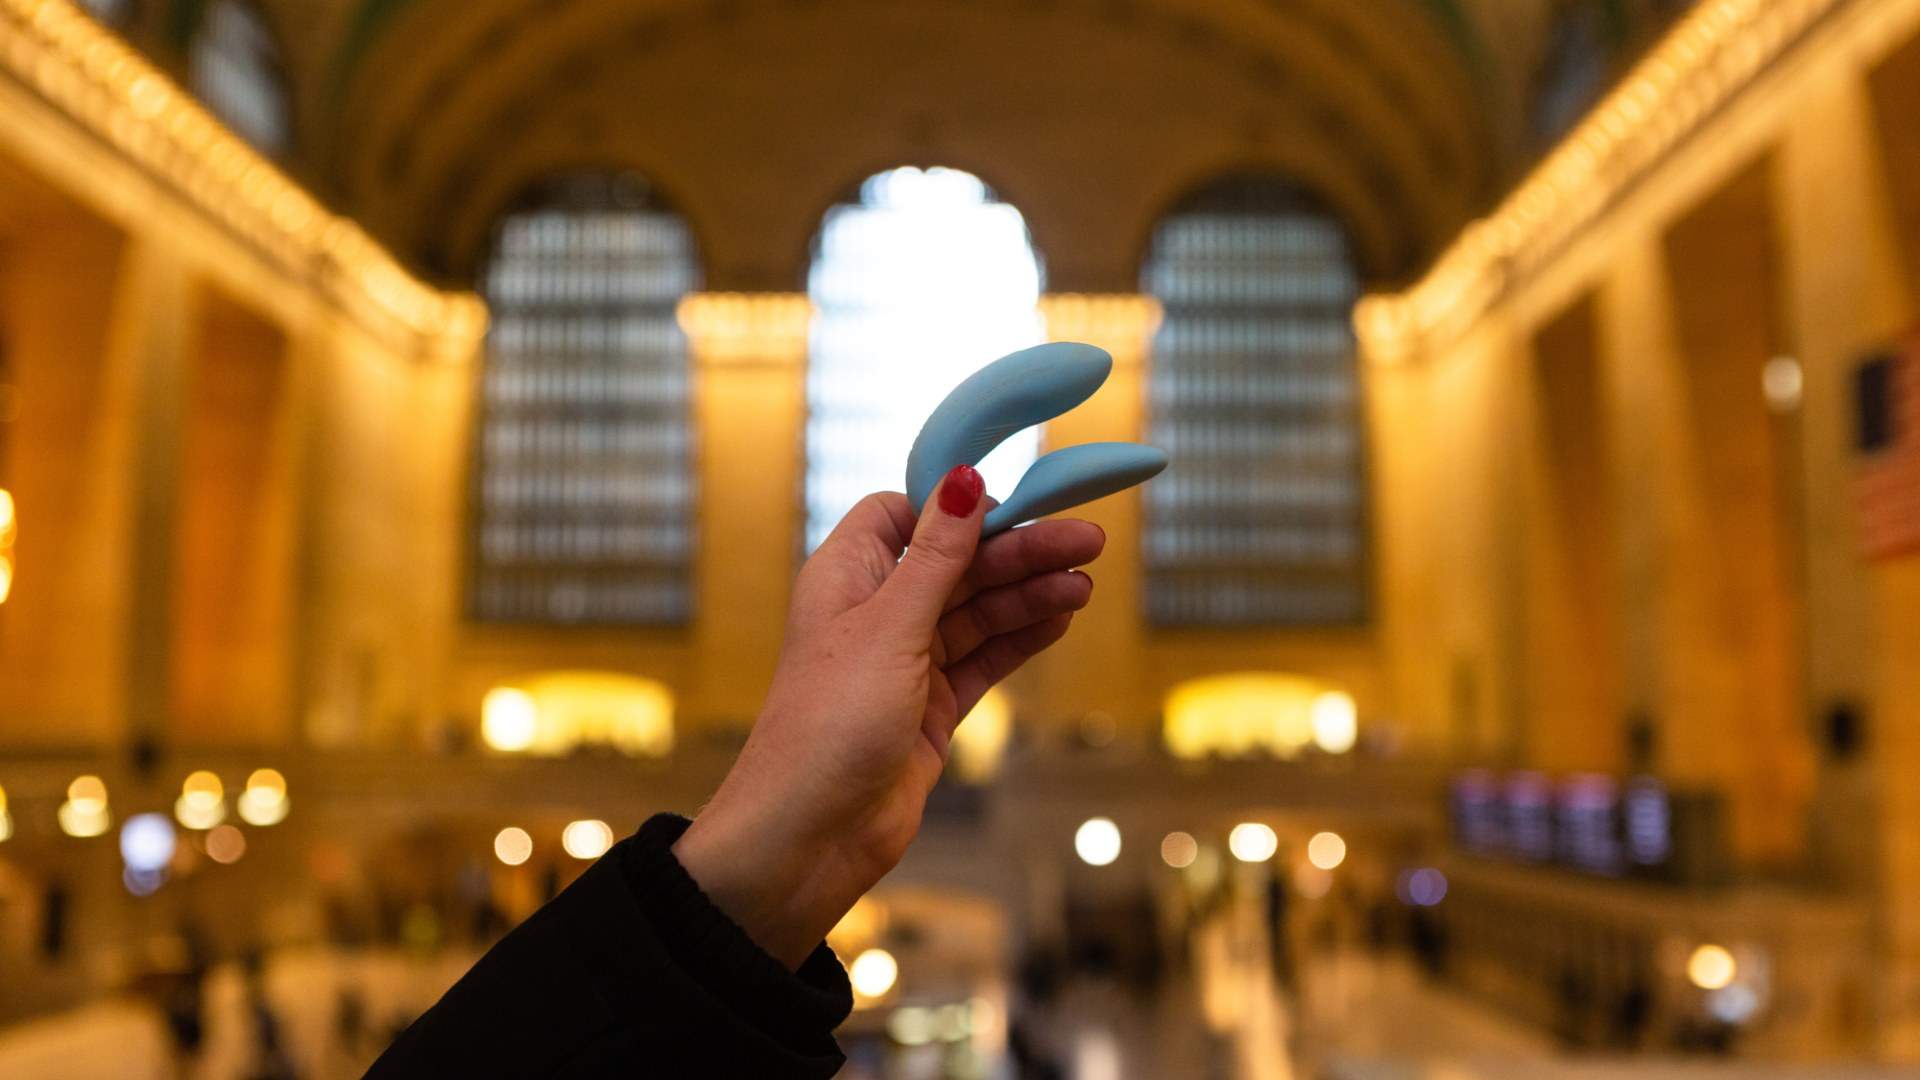 Blue vibrator being held up at Grand Central Station